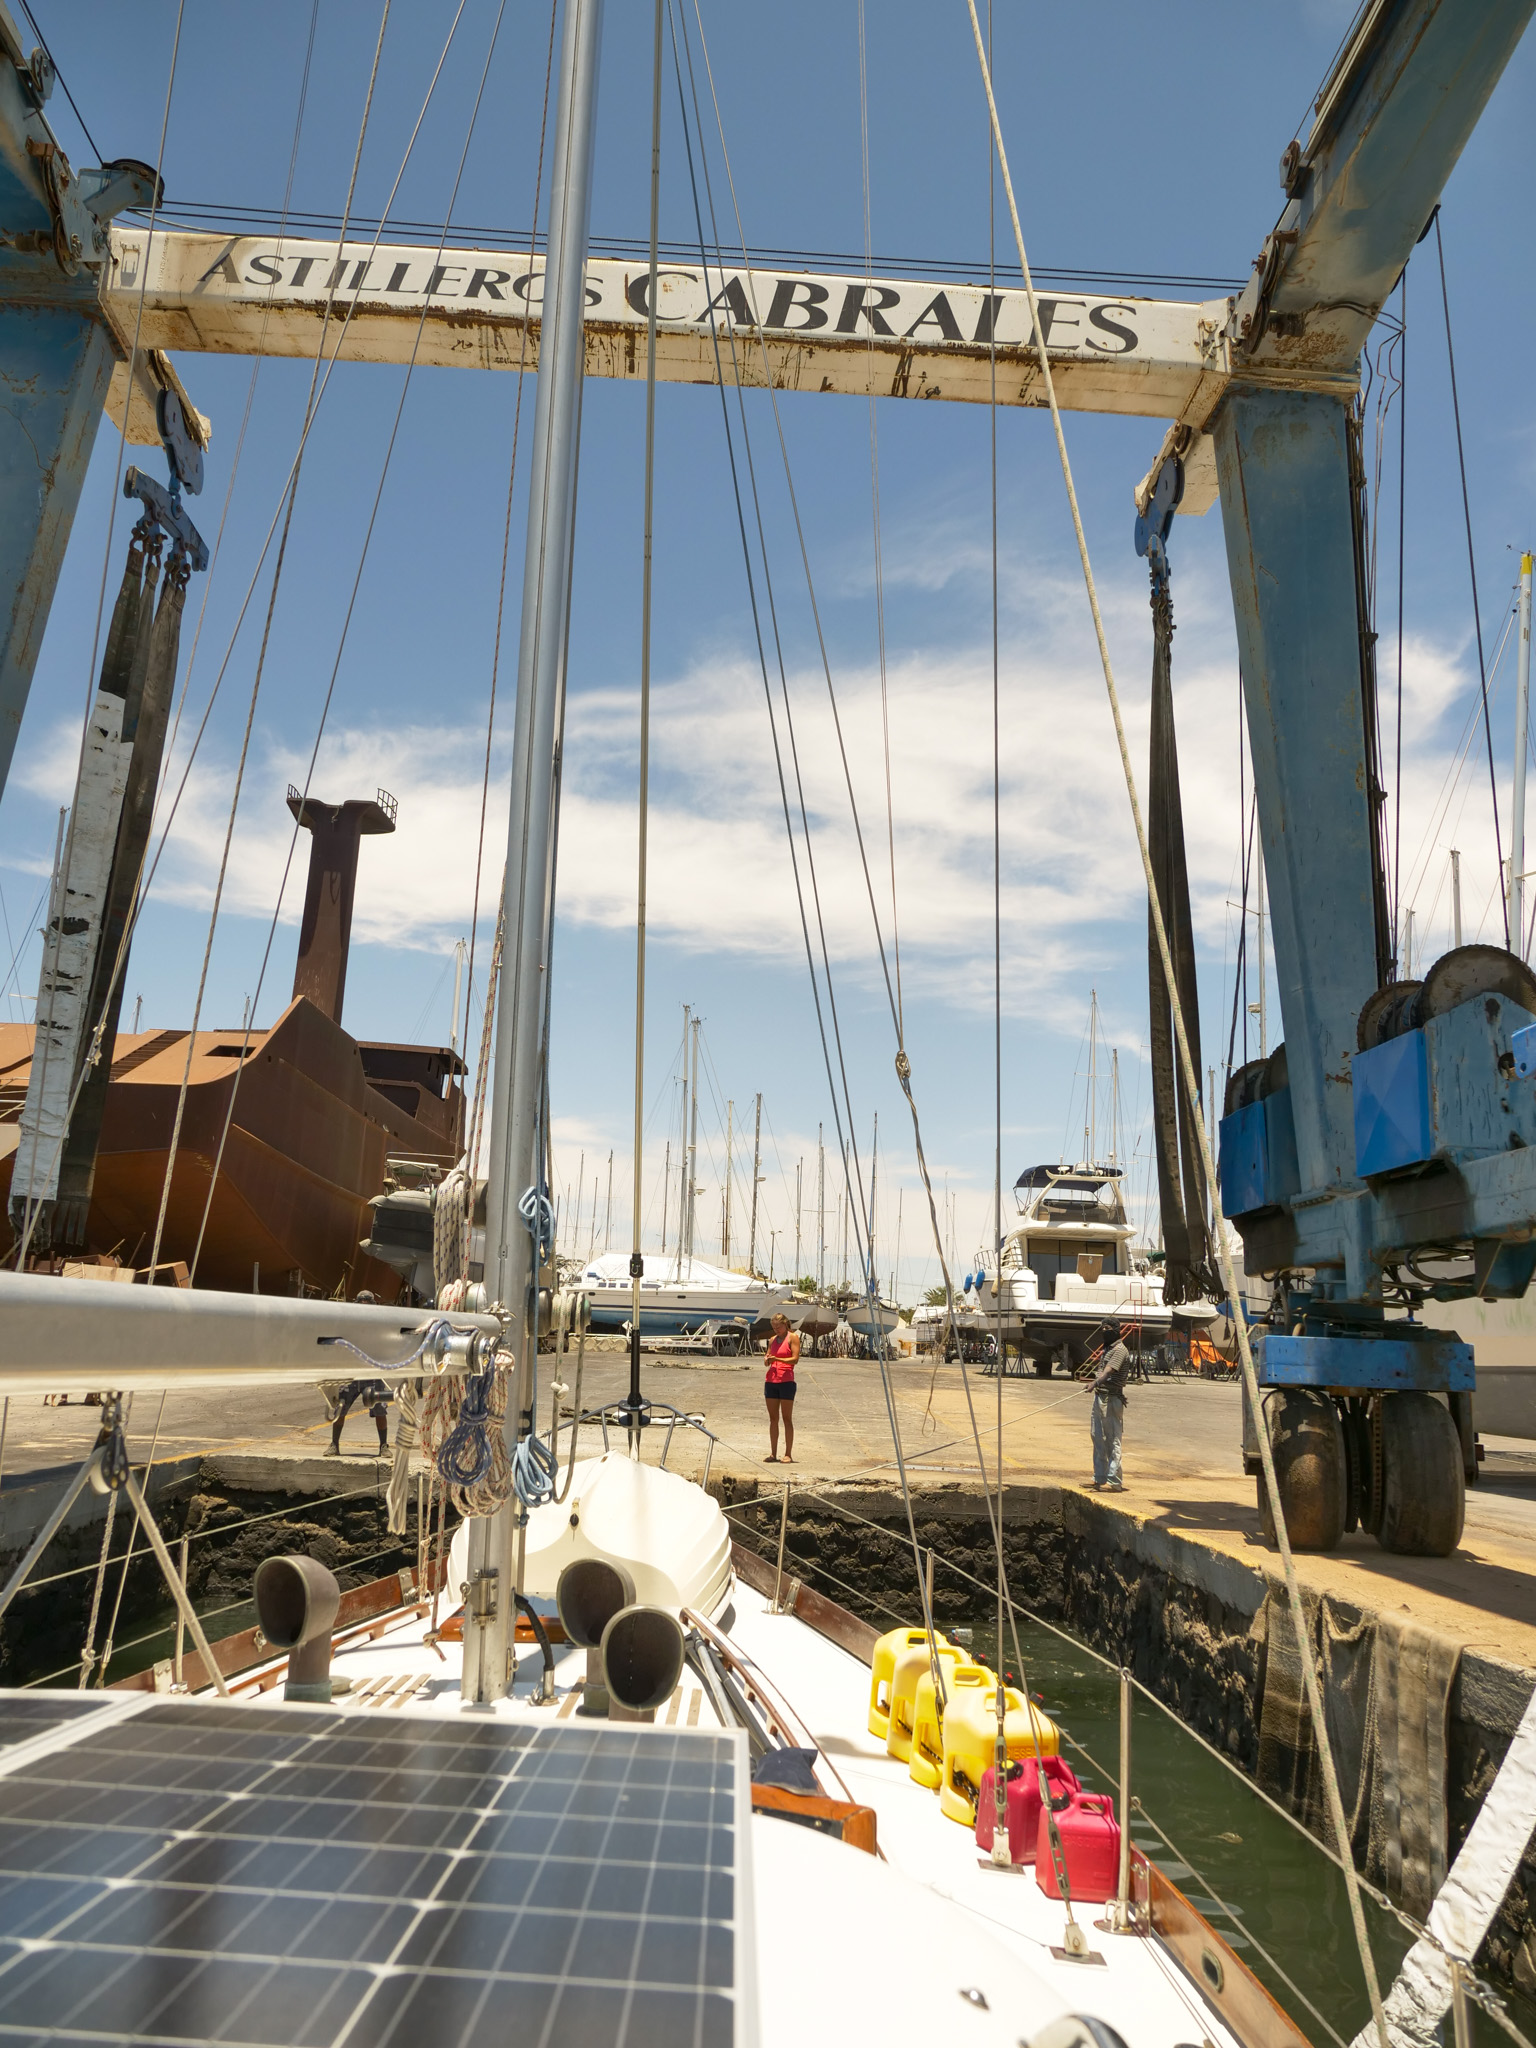 Cabrales Boat Yard - the haul out